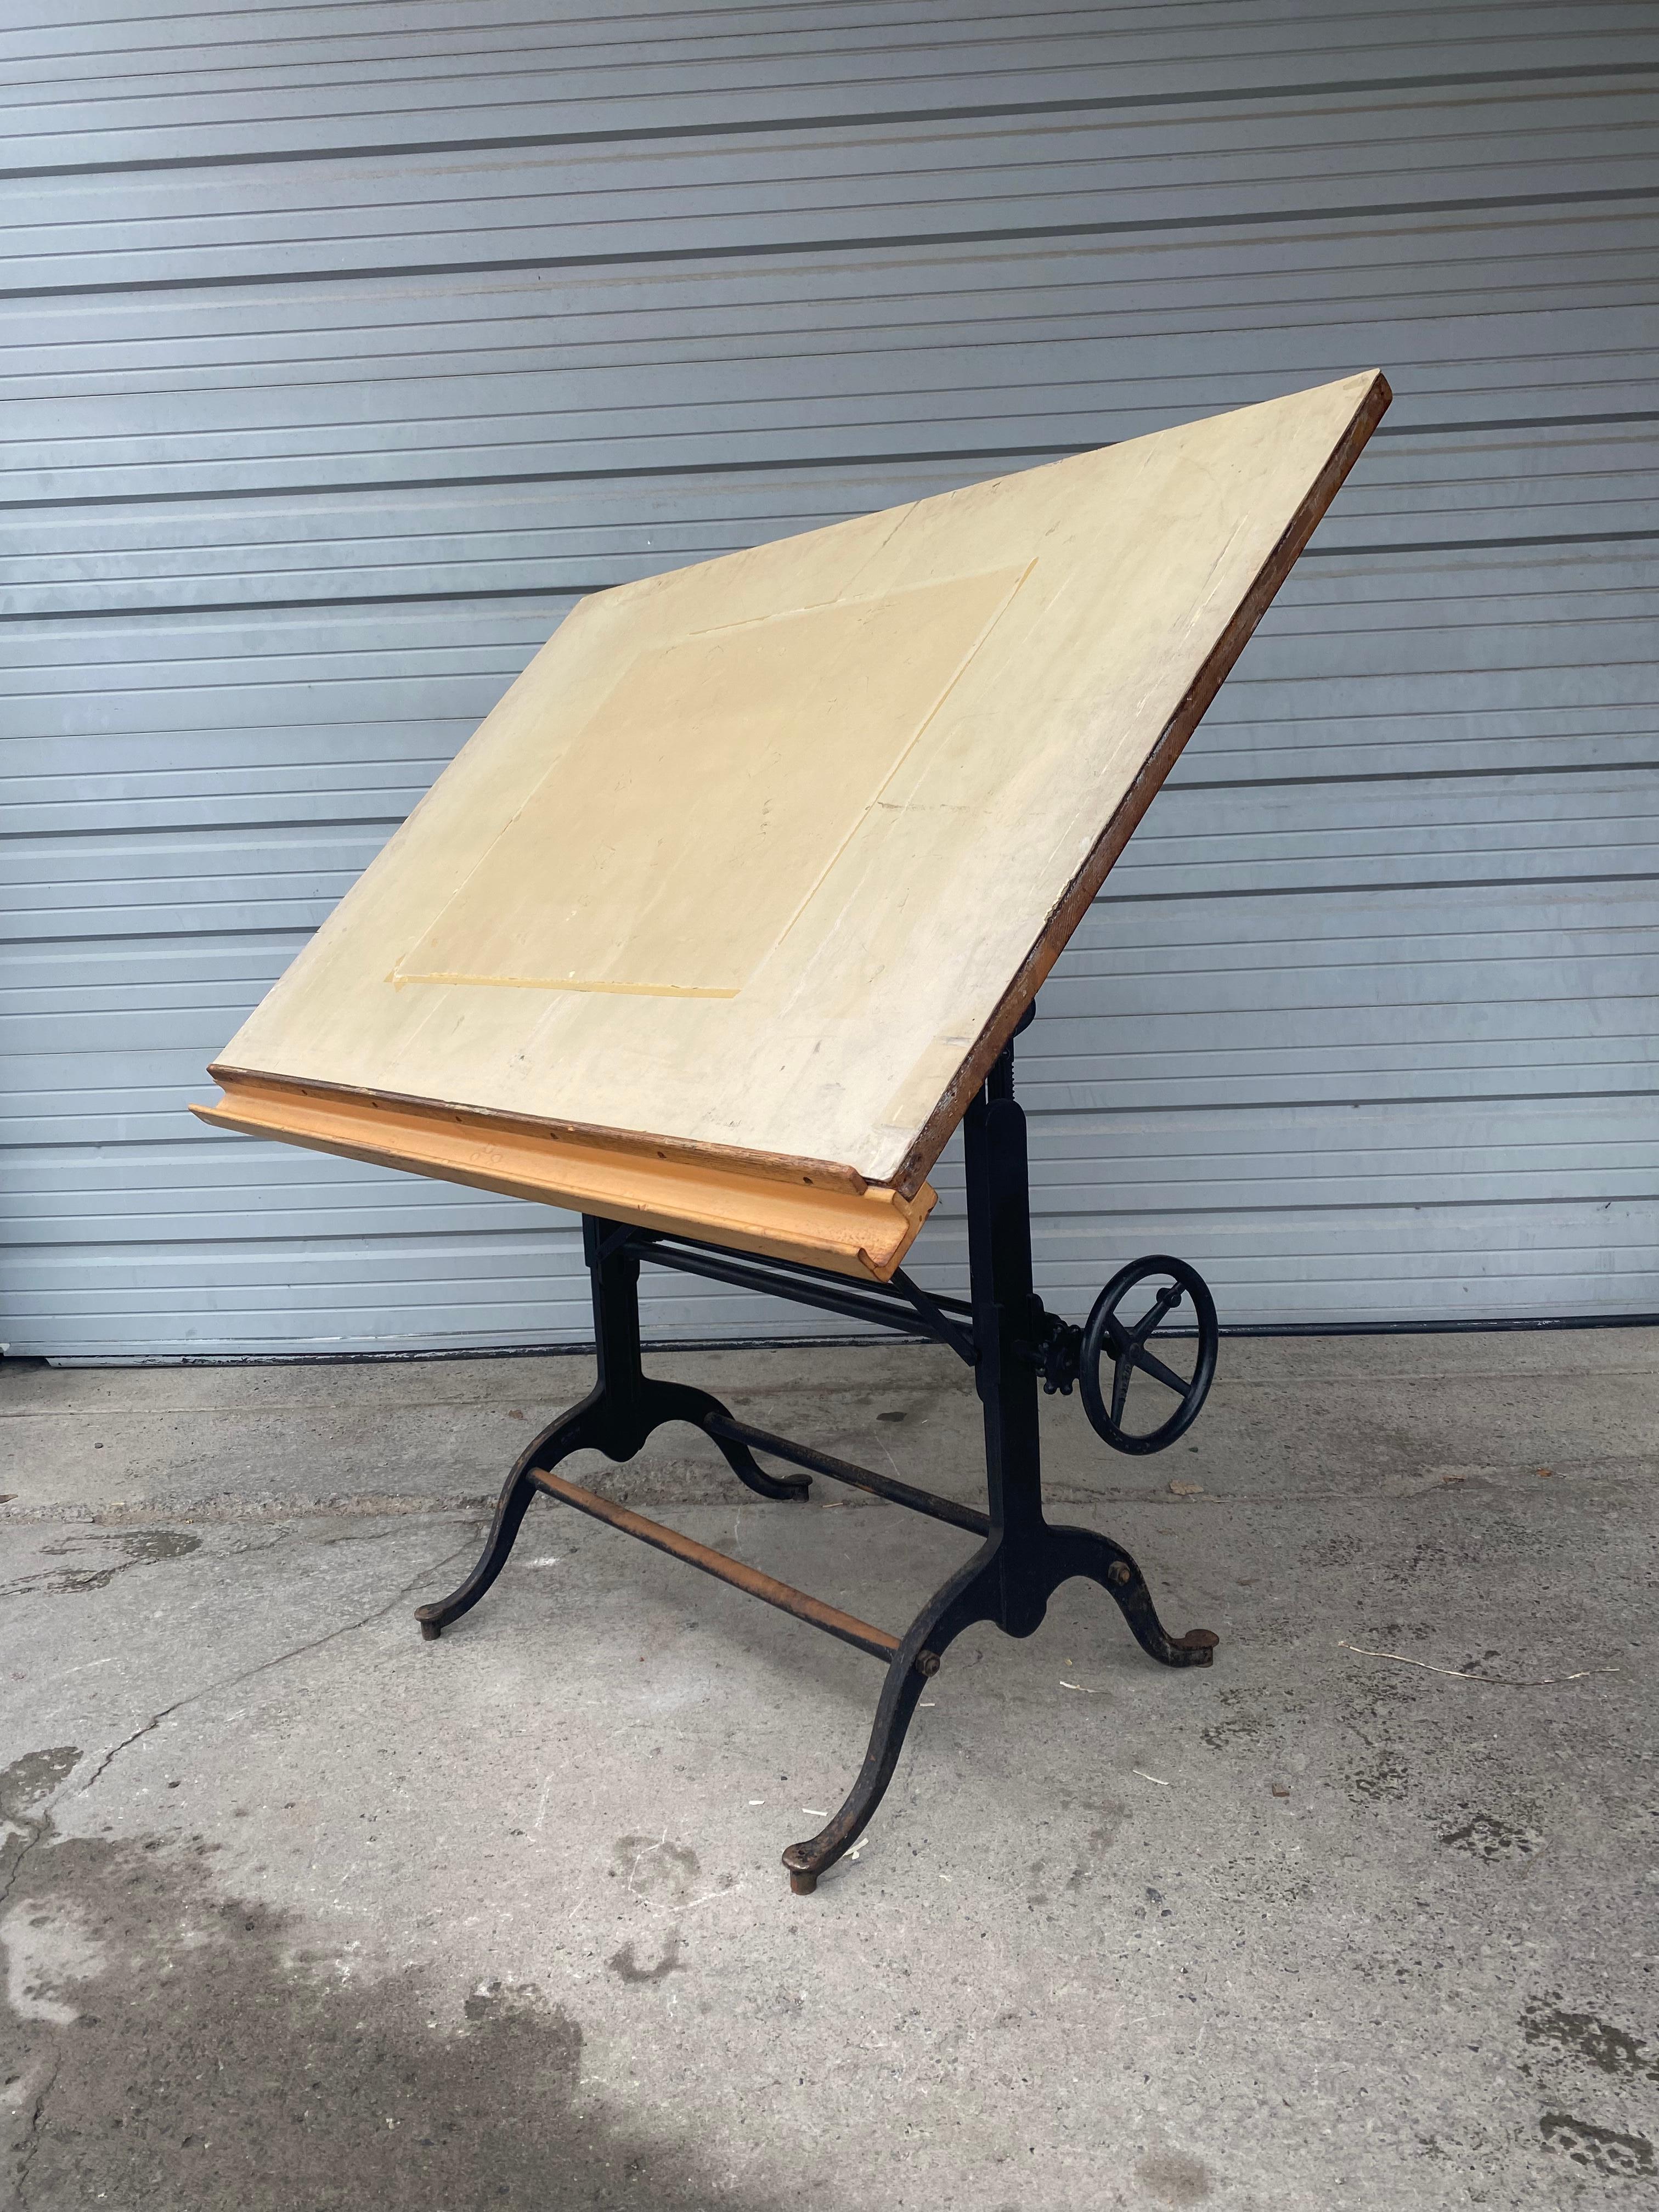 Early 1900s antique wood and cast iron drafting table by the Frederick Post Co. of Chicago/ San Fransisco. T heavy-duty, fully adjustable table base is in nice original condition. Table-top surface covered with old linoleum Fully adjustable height